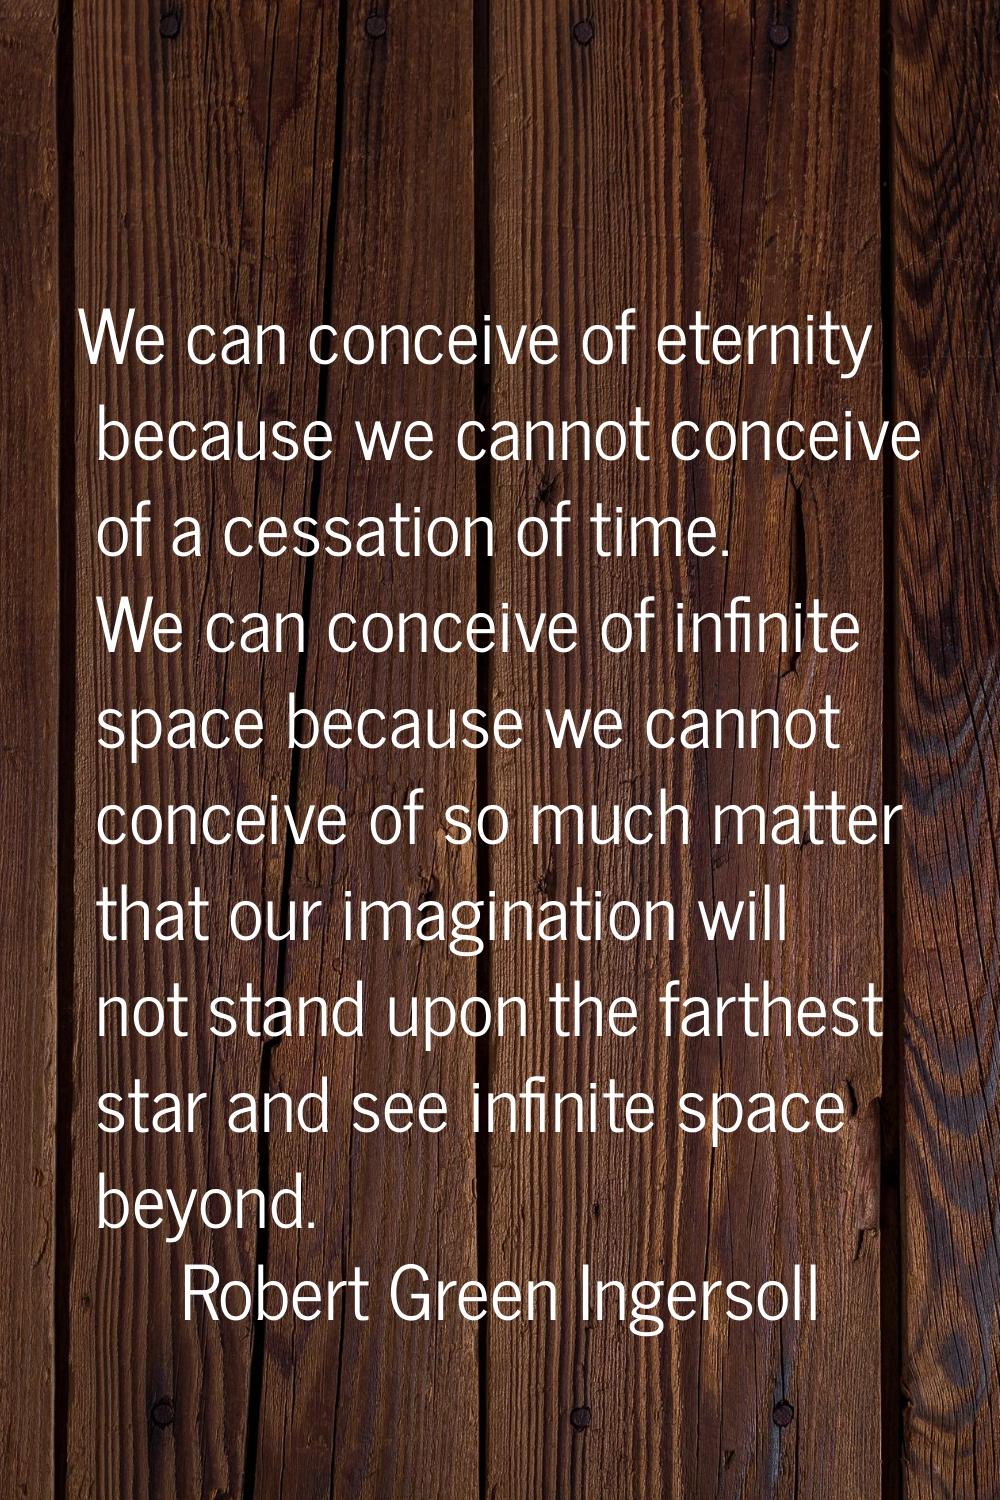 We can conceive of eternity because we cannot conceive of a cessation of time. We can conceive of i